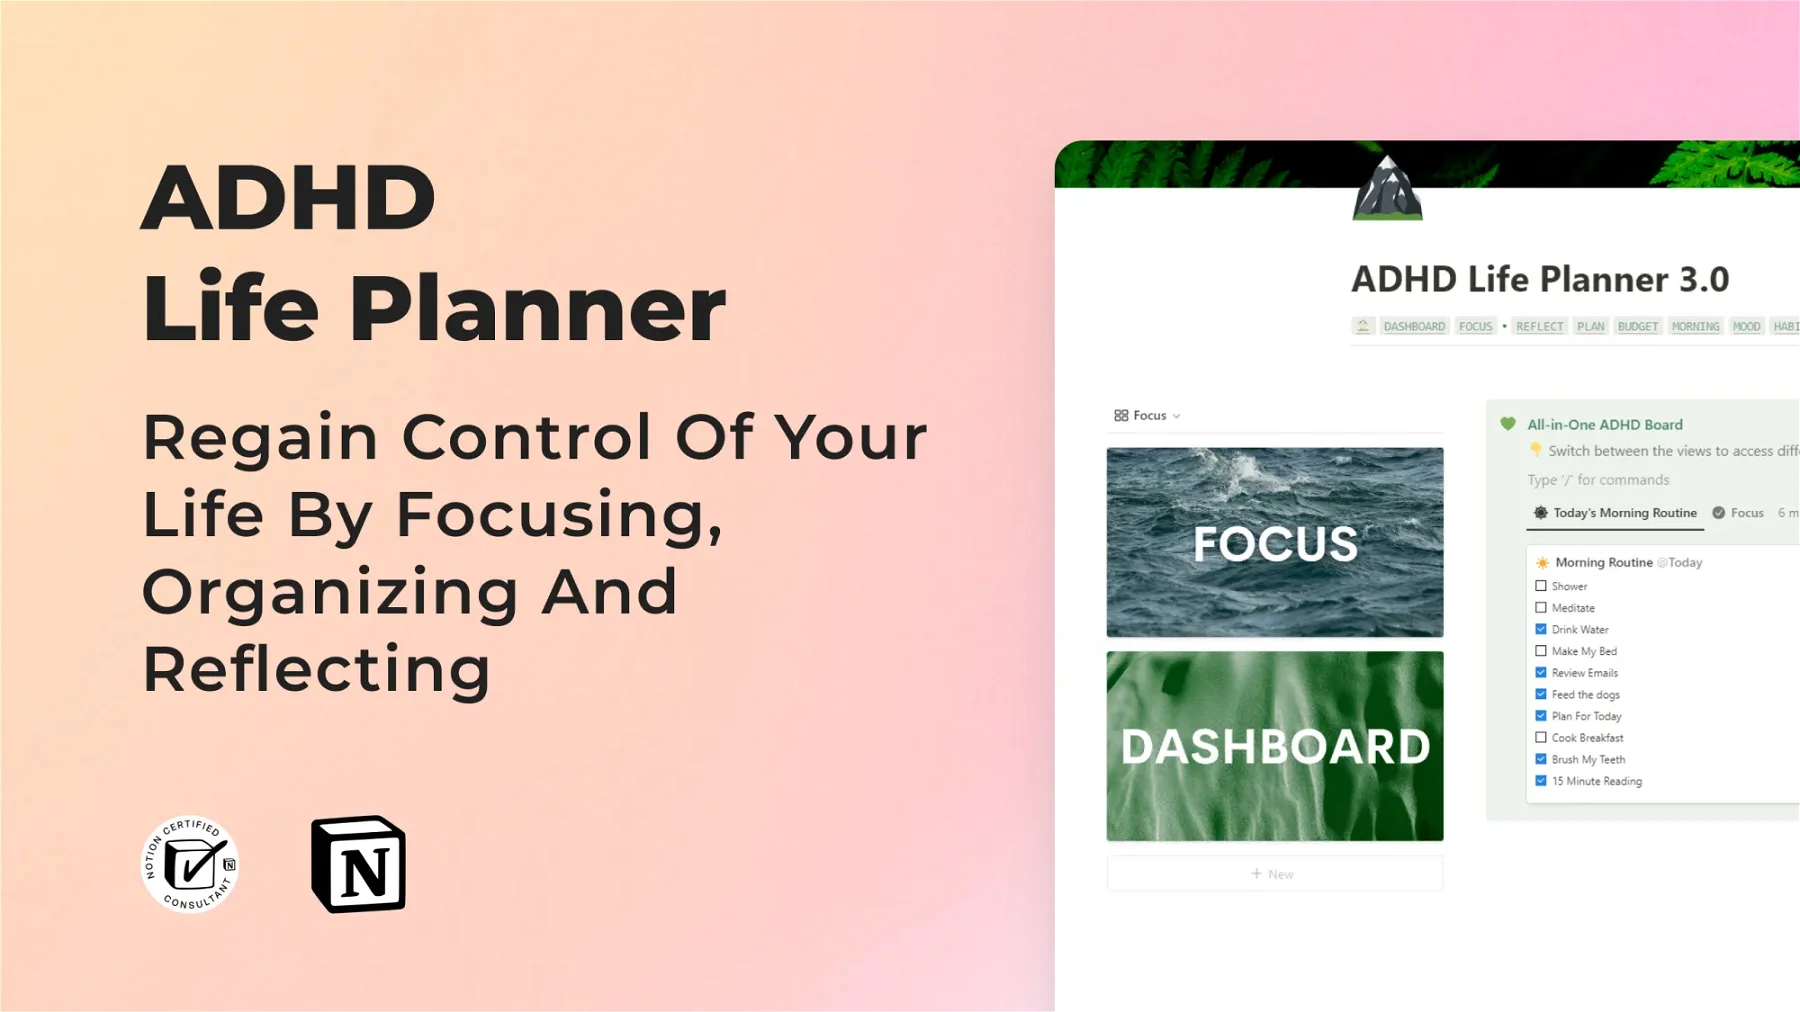 🤯 ADHD Life Planner 3.0 - Master Your Busy Mind!